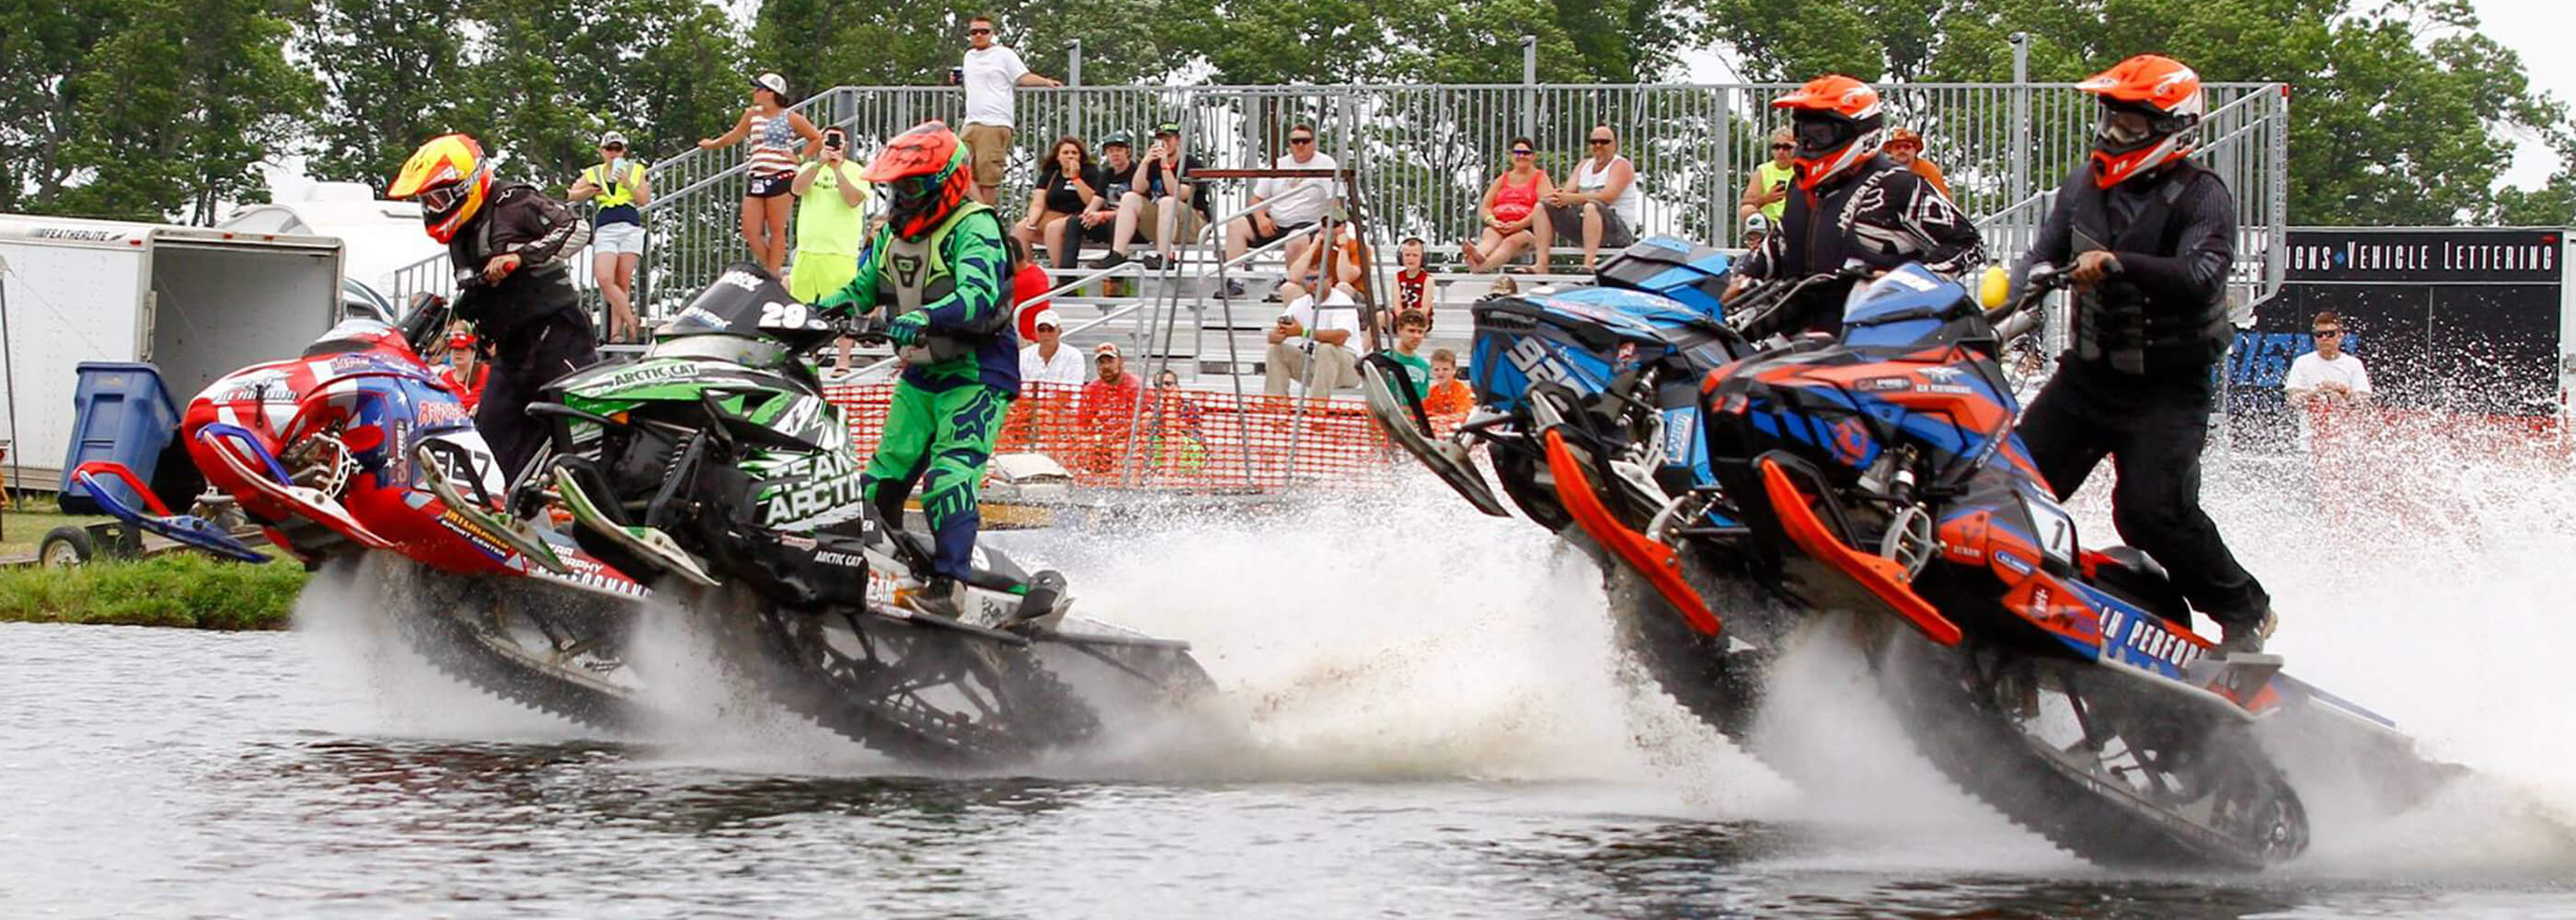 Group of professional watercross racers riding snowmobiles on the water at International Watercross Association event